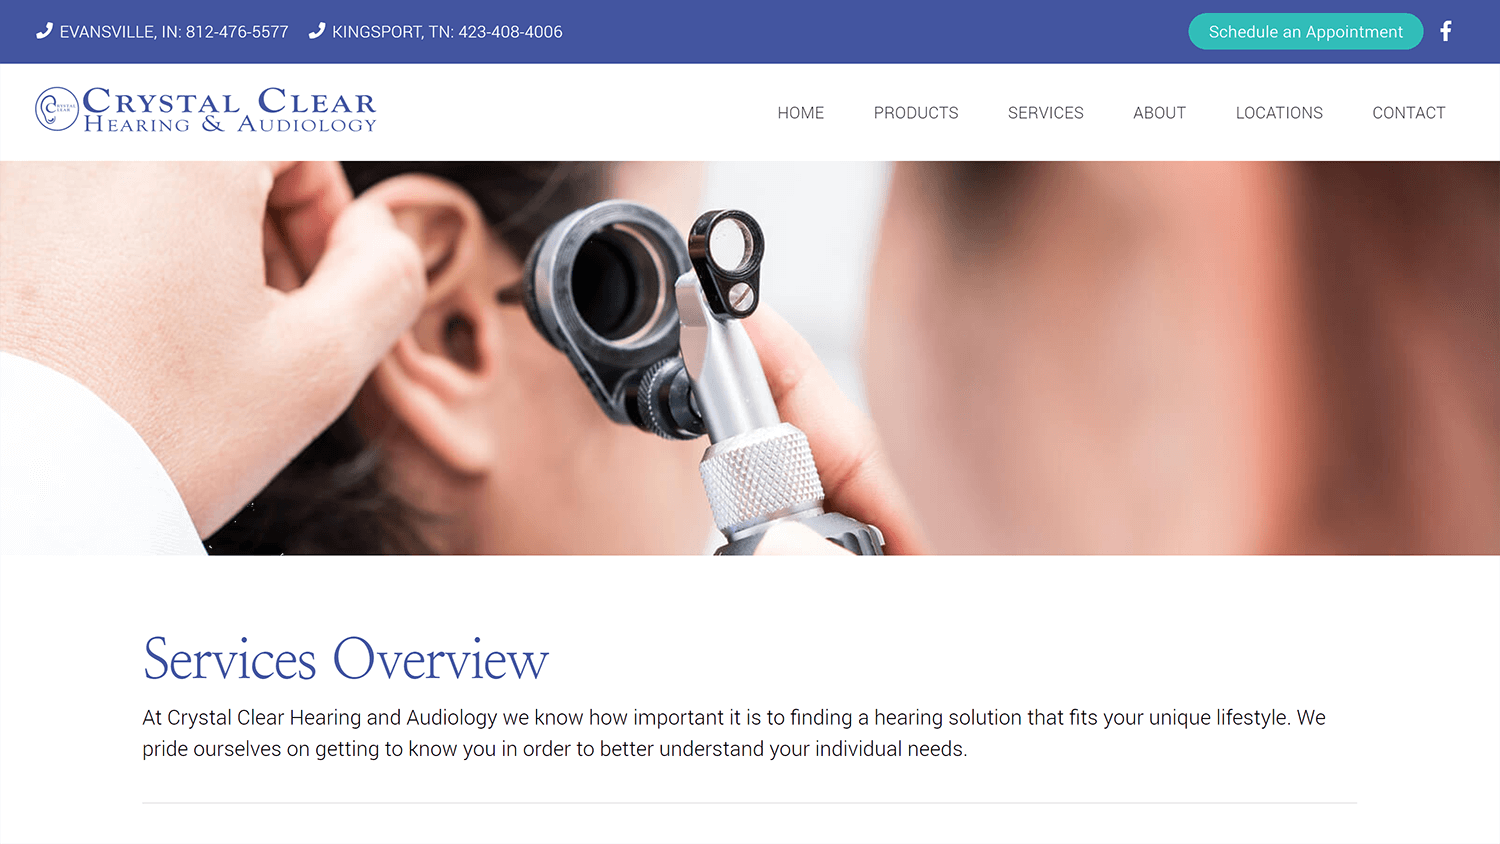 Crystal Clear Hearing & Audiology